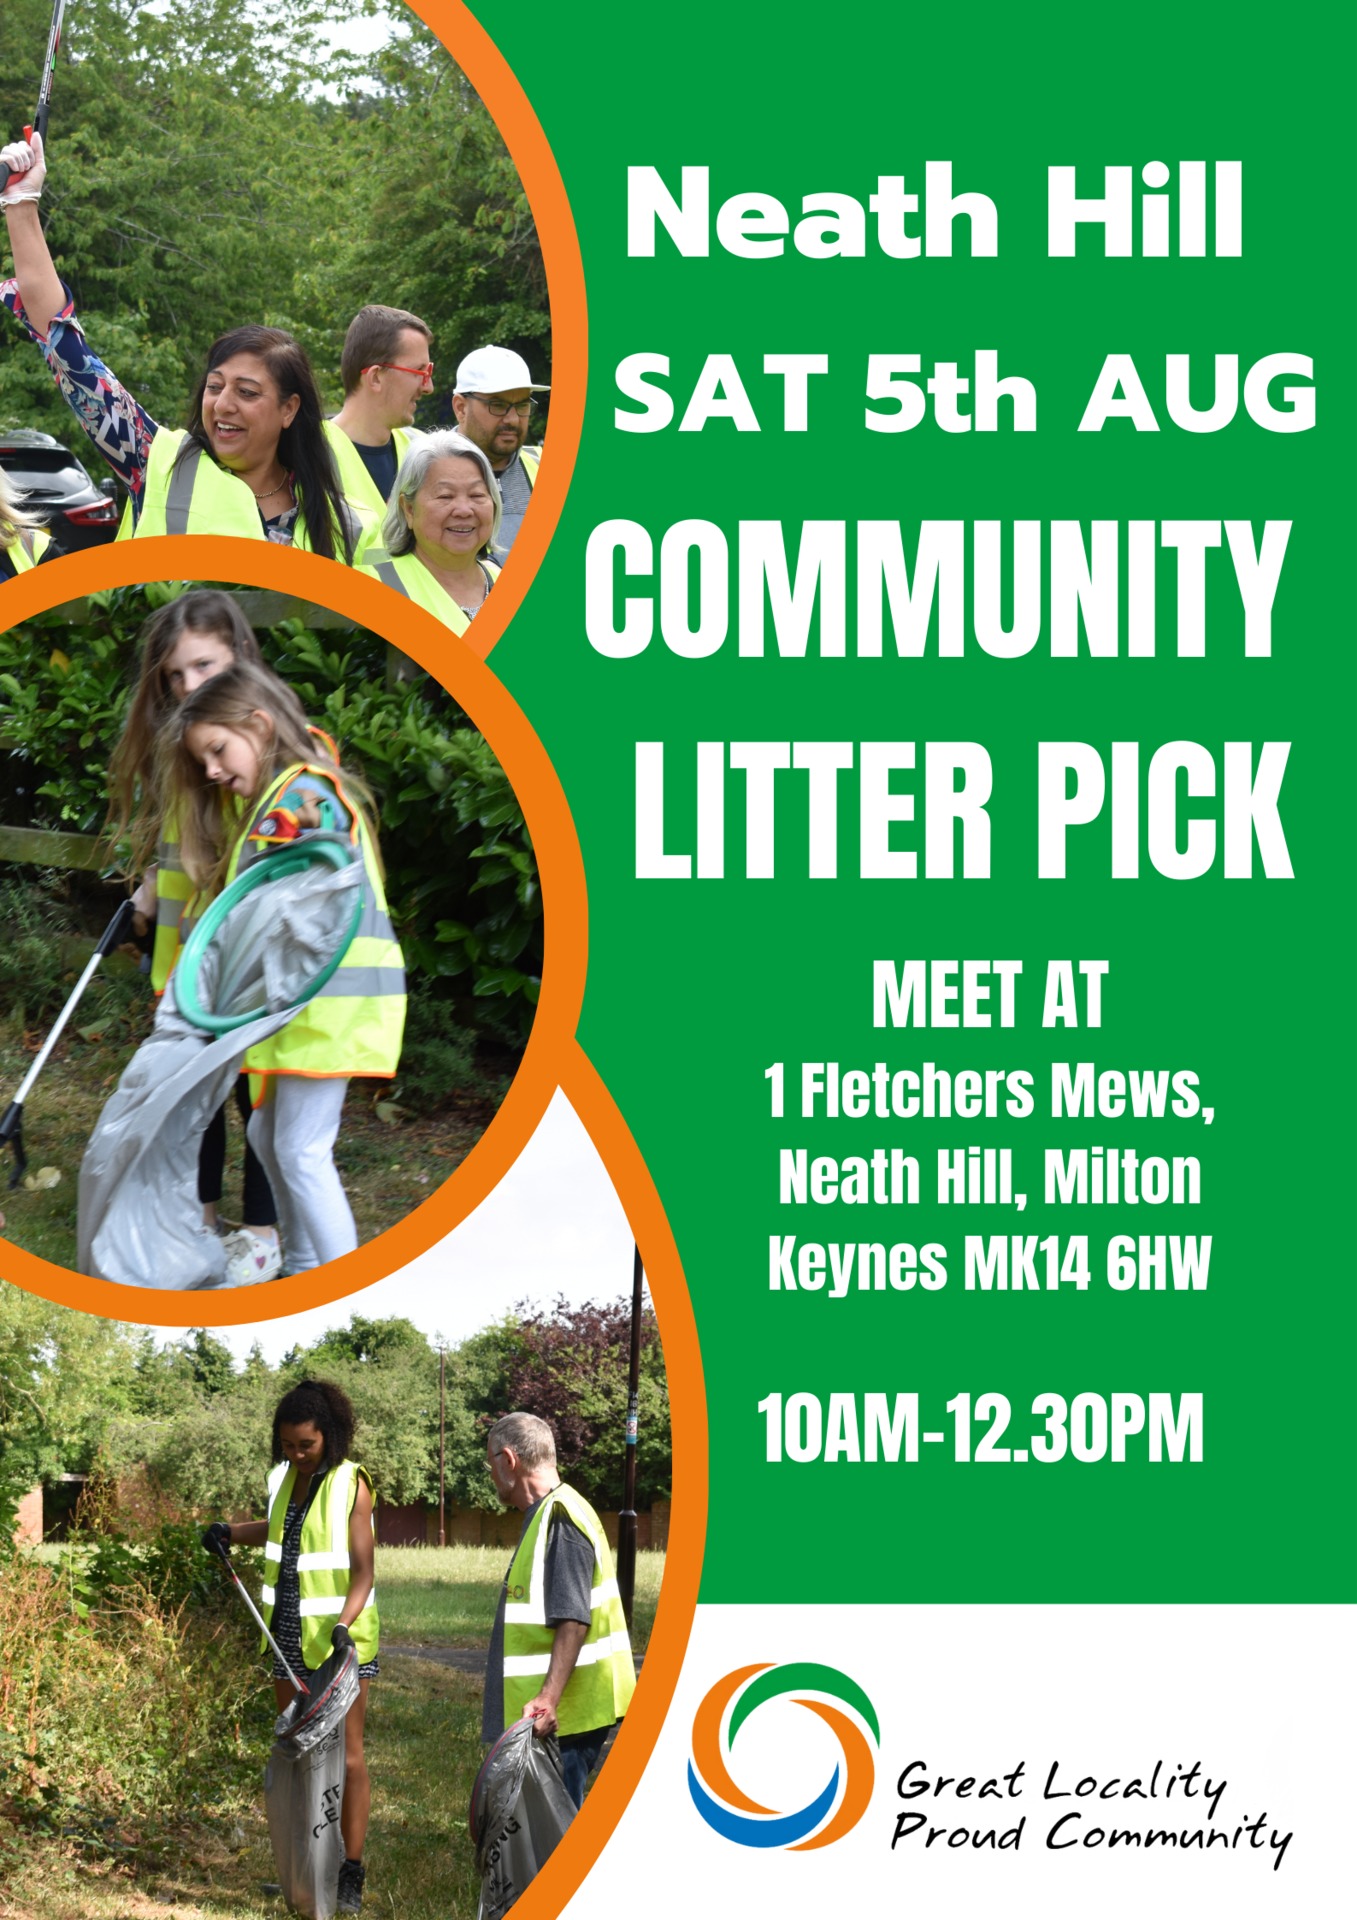 Poster featuring details of Community Litter Pick on the 1st July